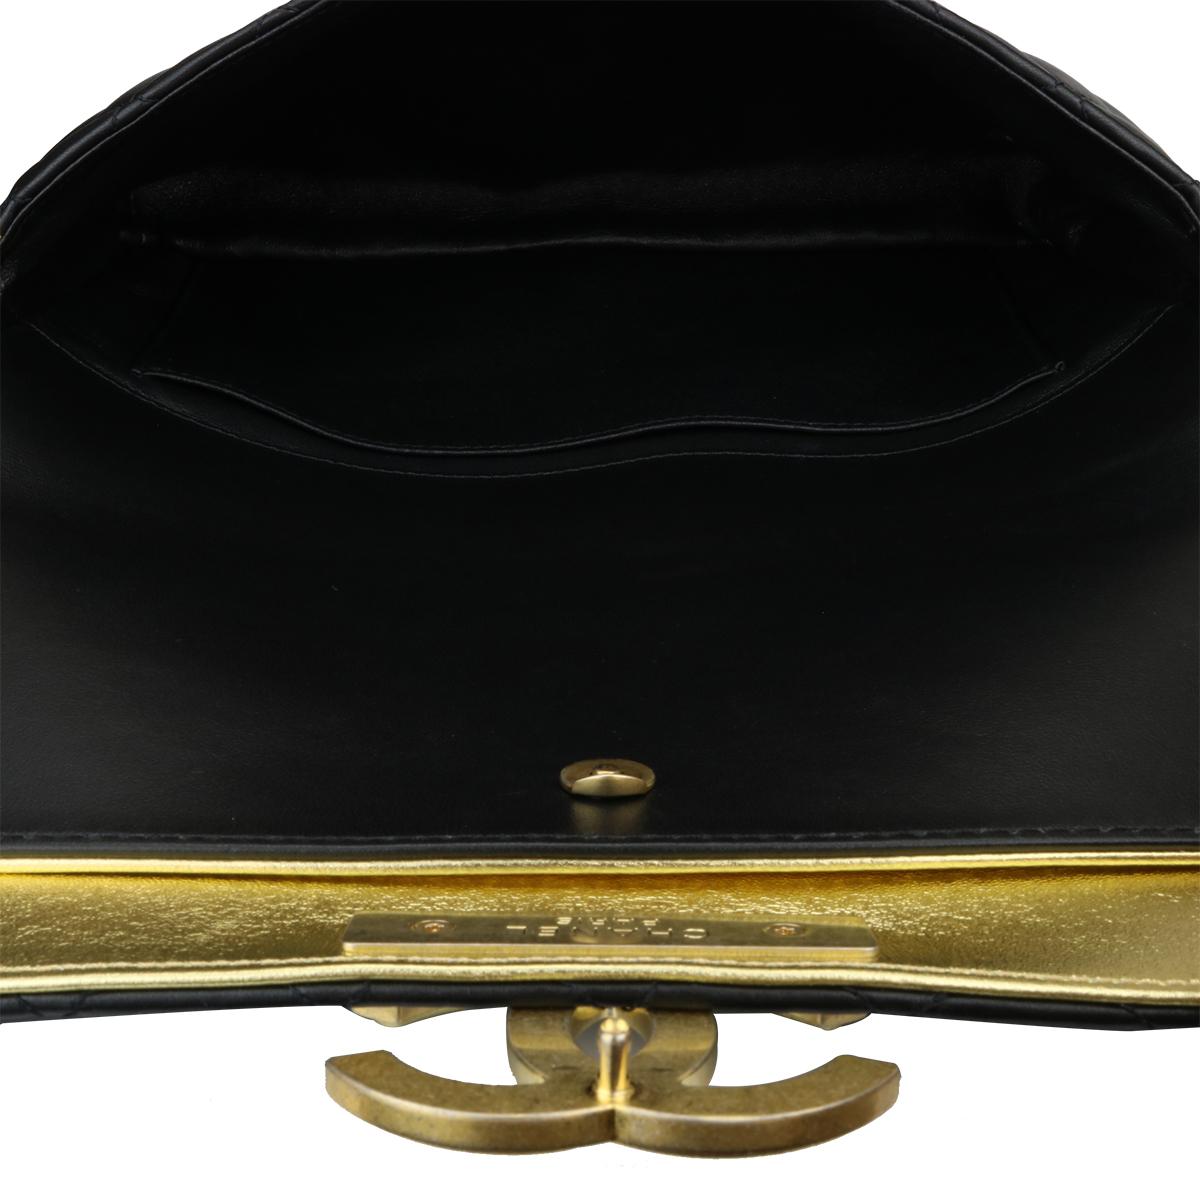 CHANEL CC Chic Flap Bag Black and Gold Lambskin with Brushed Gold Hardware 2019 10